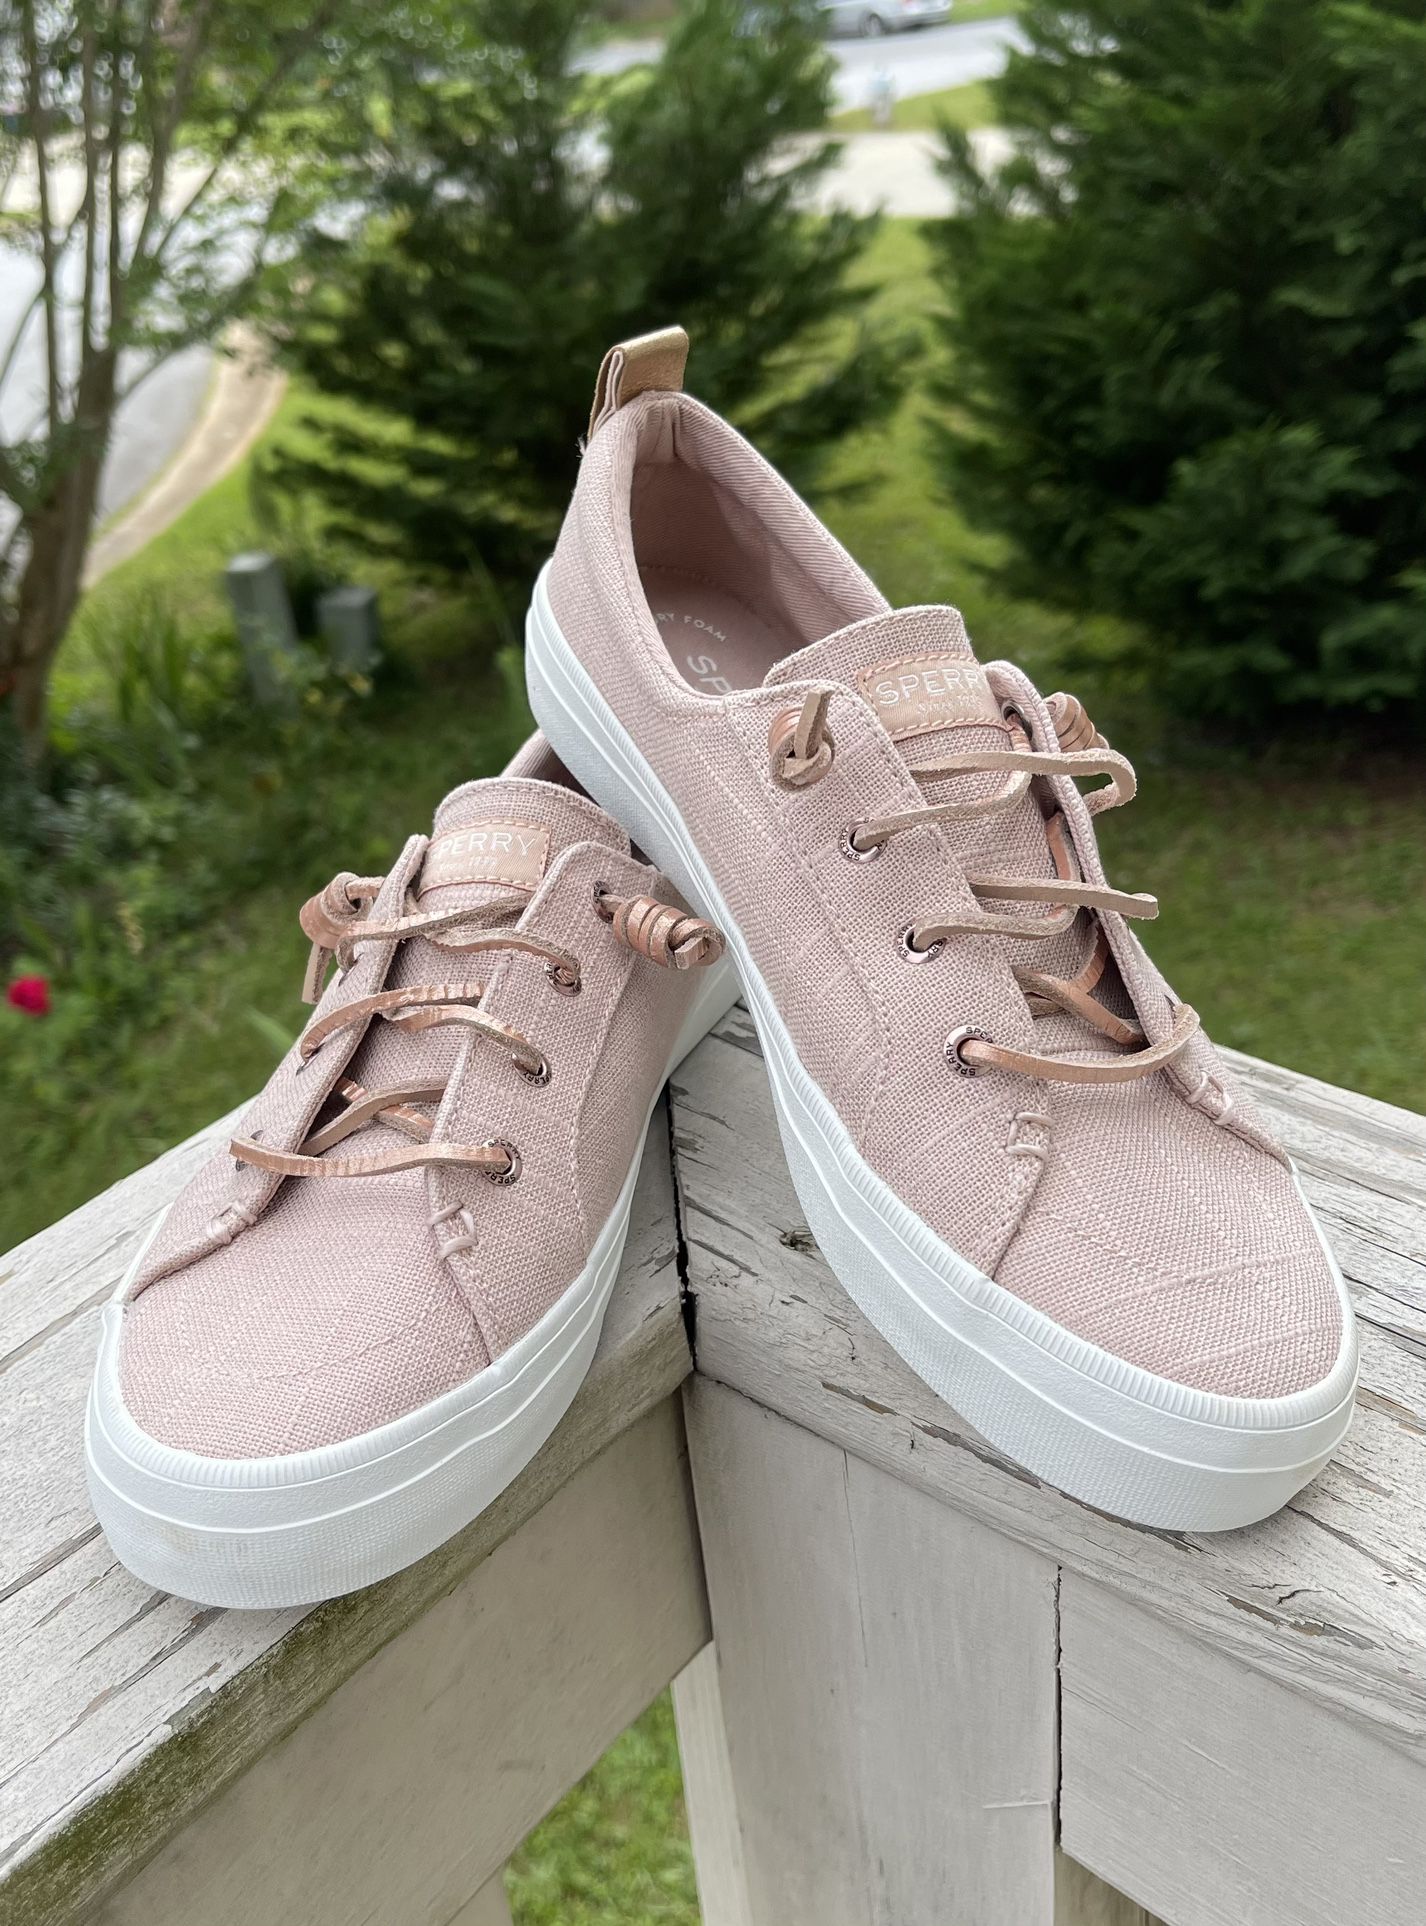 Sperry Top Sider Crest Vibe Sneakers Women Sz 8 Pink Leather STS82372